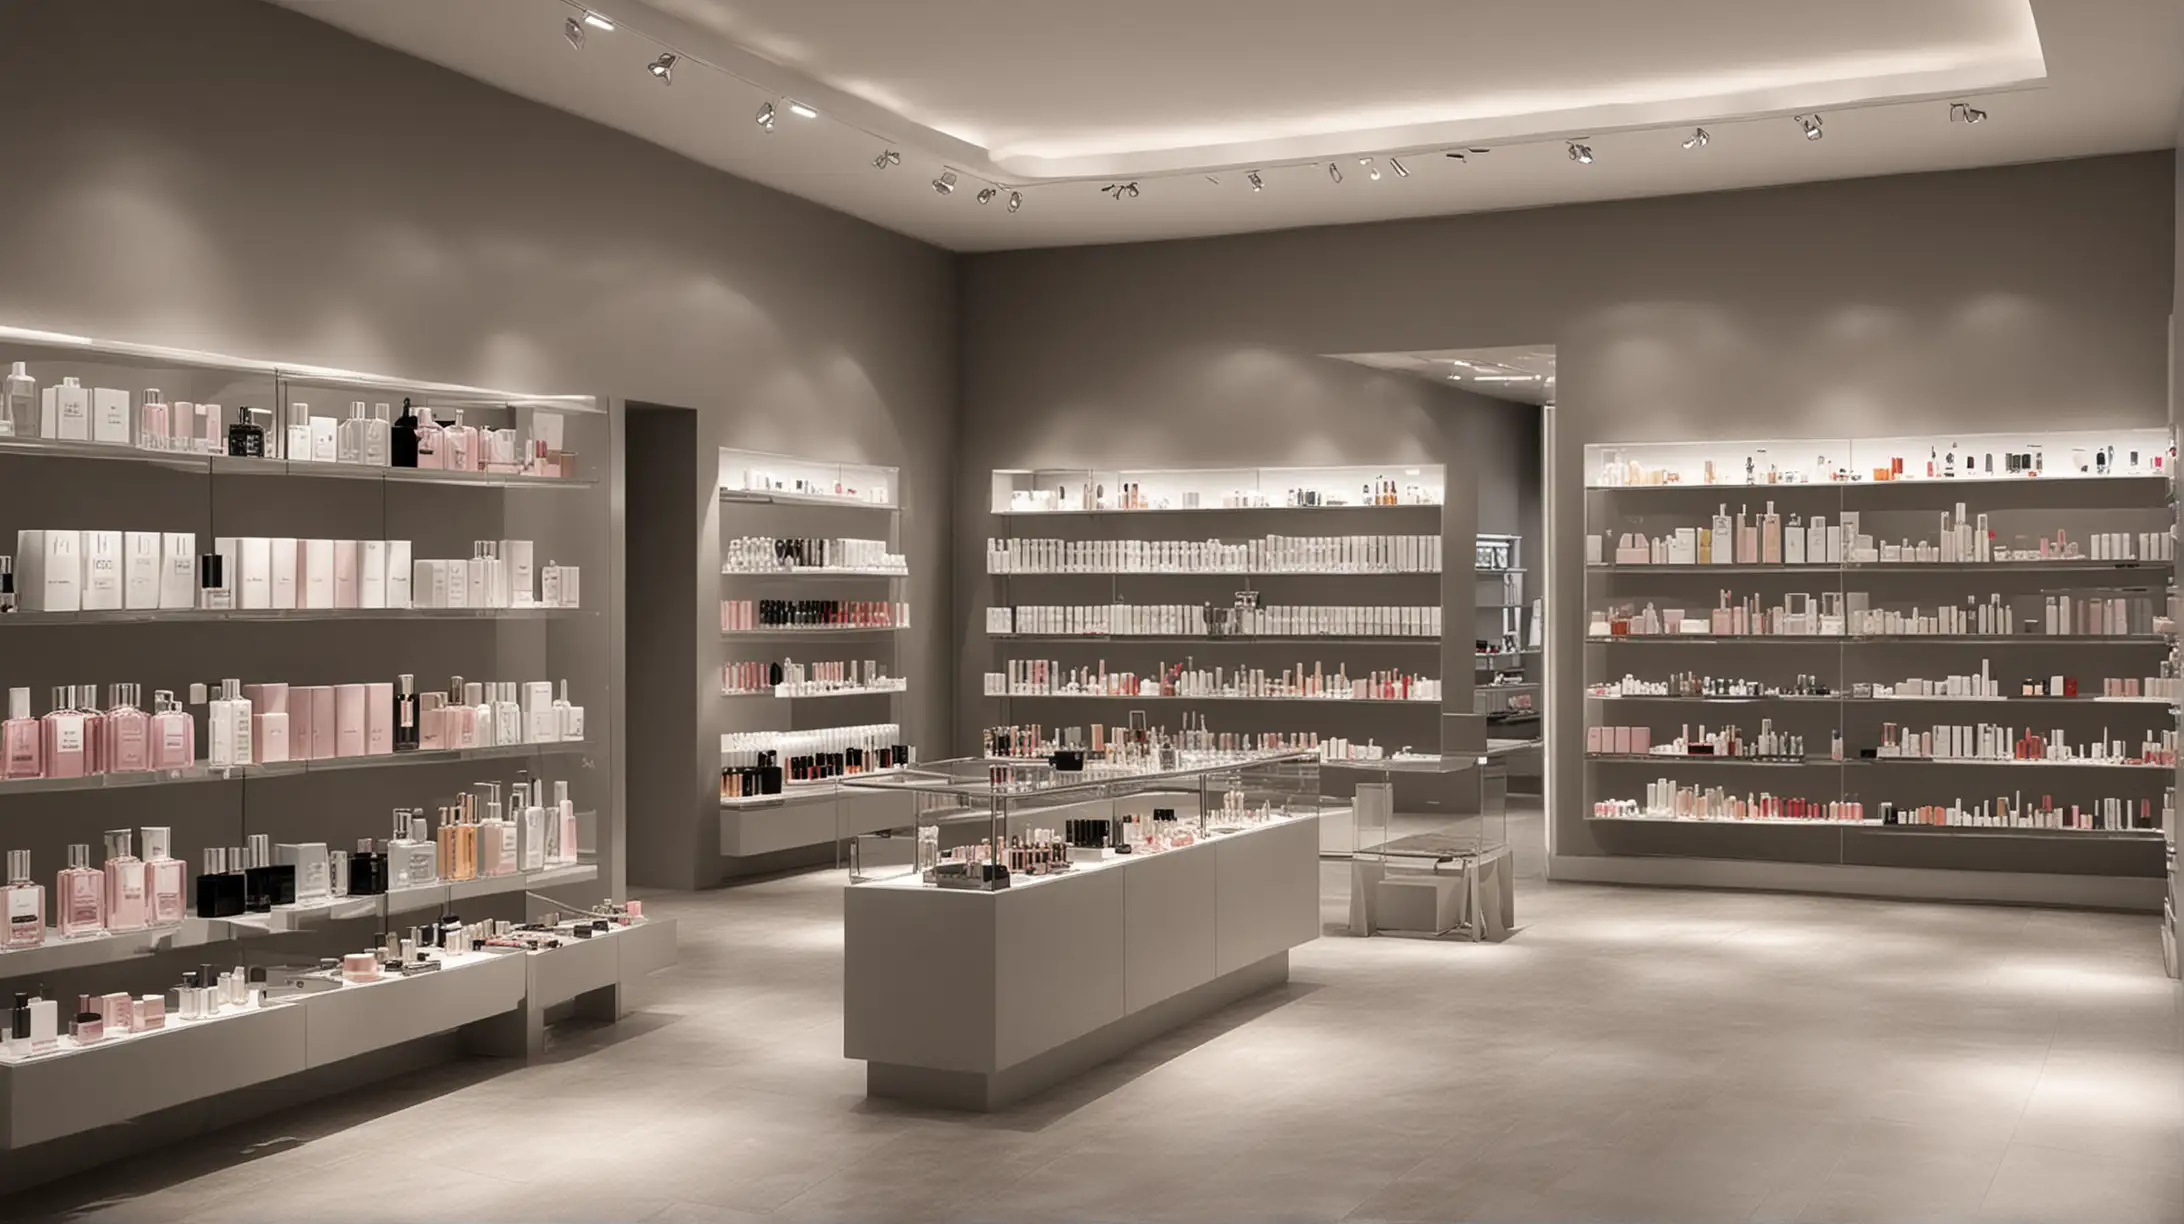 Create an image of a modern perfume store with a strong emphasis on perspective. The design should be contemporary and sleek, featuring clean lines and minimalist decor. Display shelves should recede into the distance, creating a sense of depth and sophistication. The walls should be designed with multiple colors, adding a vibrant and artistic touch to the modern interior.